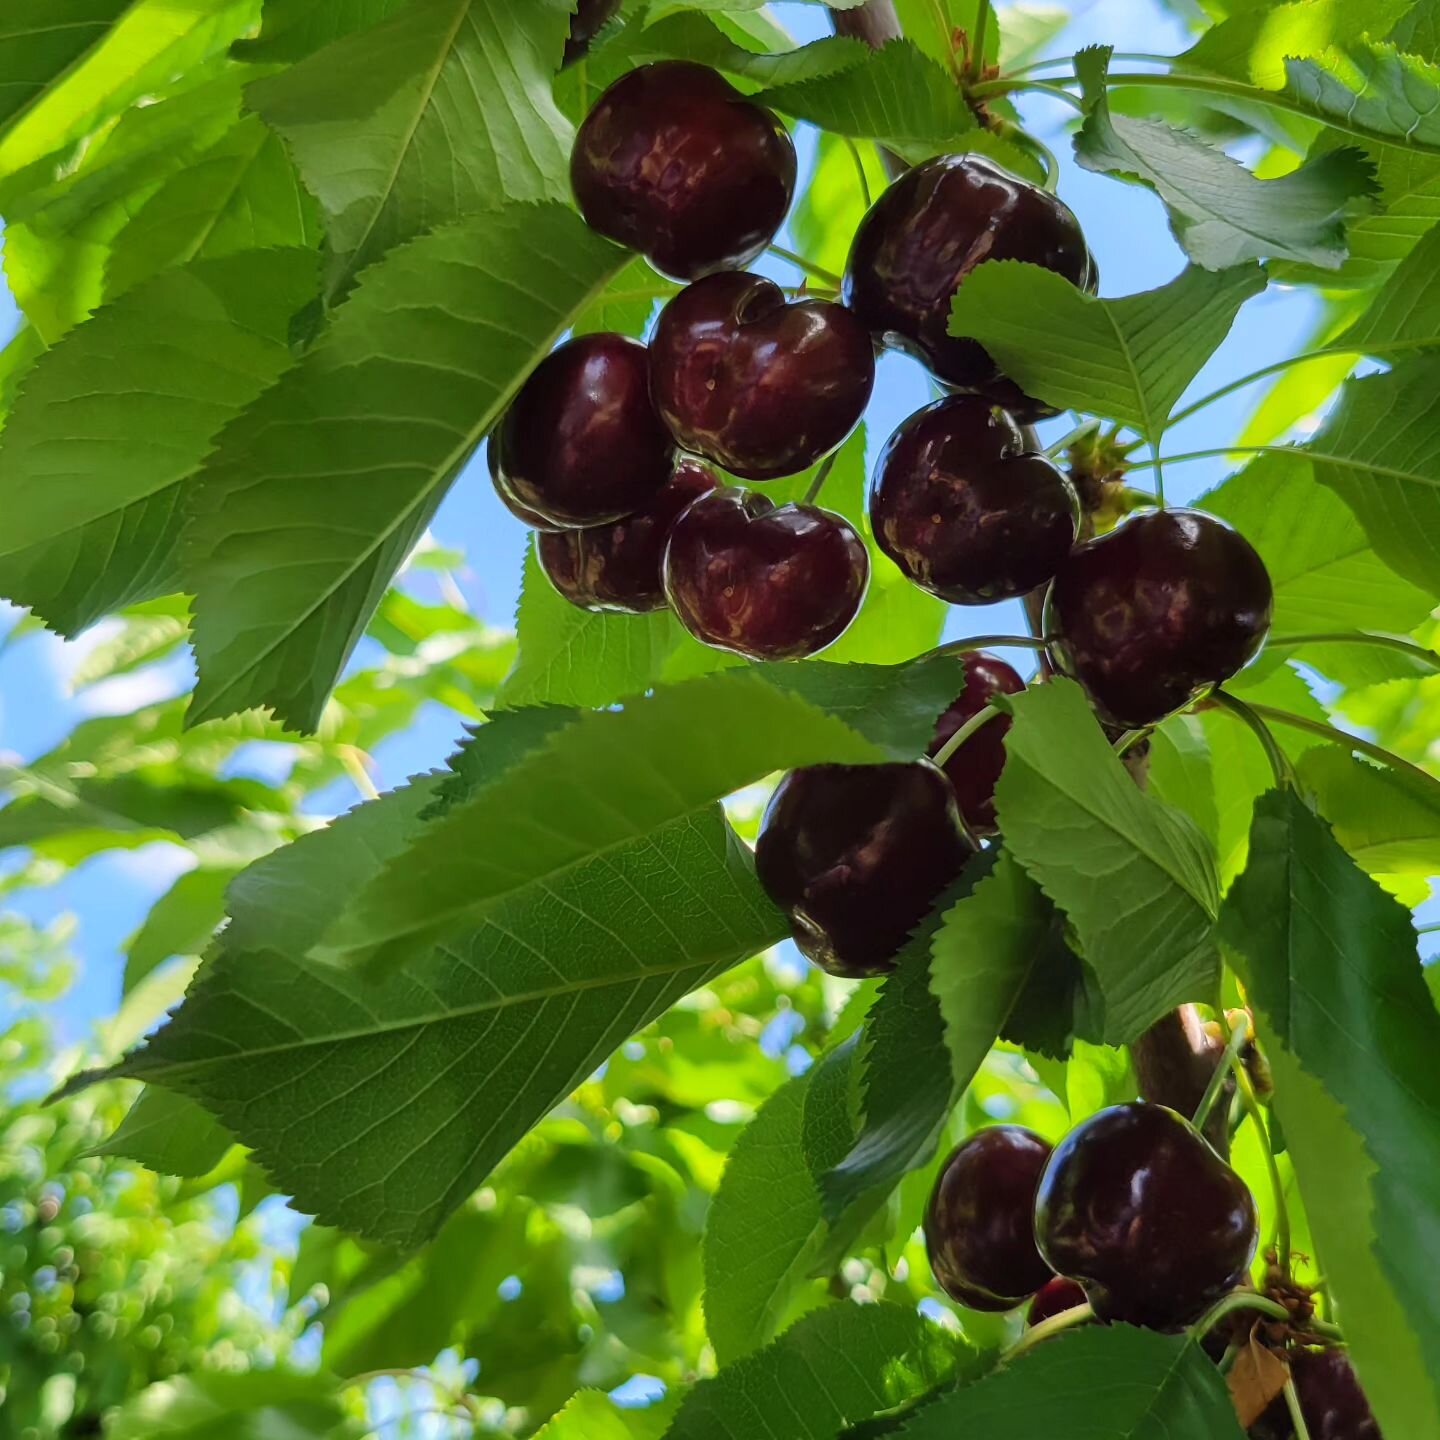 U-Pick Cherries 
Wednesday - Sunday
9 AM - 5 PM

$4.00 per pound
Cash Only
Pay for what you pick.

🍒Picking Brooks and Corals 

📍501 Payne Ave. Brentwood, CA 94513

No reservations, entrance fees, animals or picnics.

Season will run until end of J